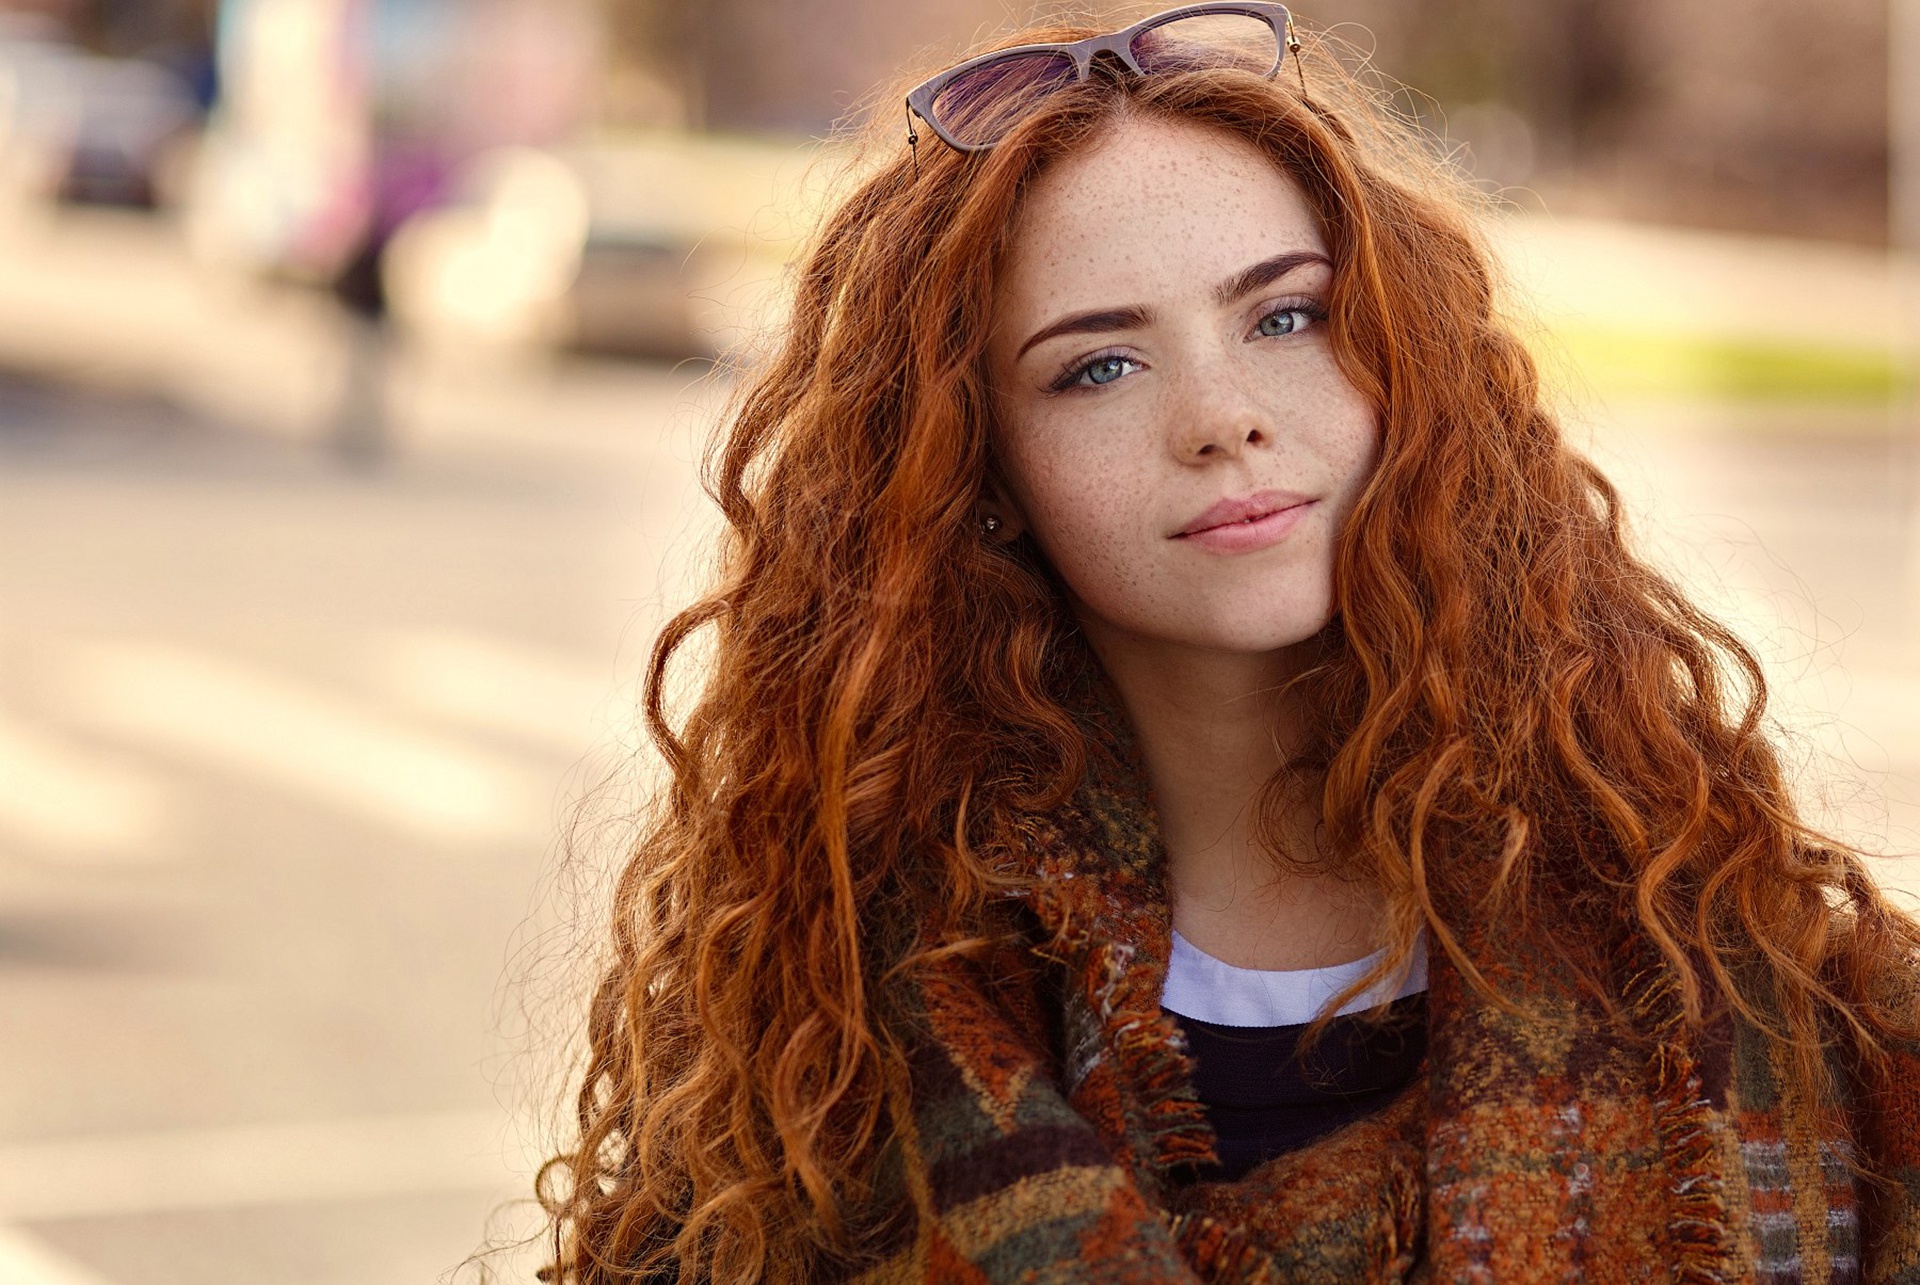 Women Model Redhead Long Hair Face Curly Hair Looking At Viewer Women Outdoors Freckles Glasses Dept 1920x1285